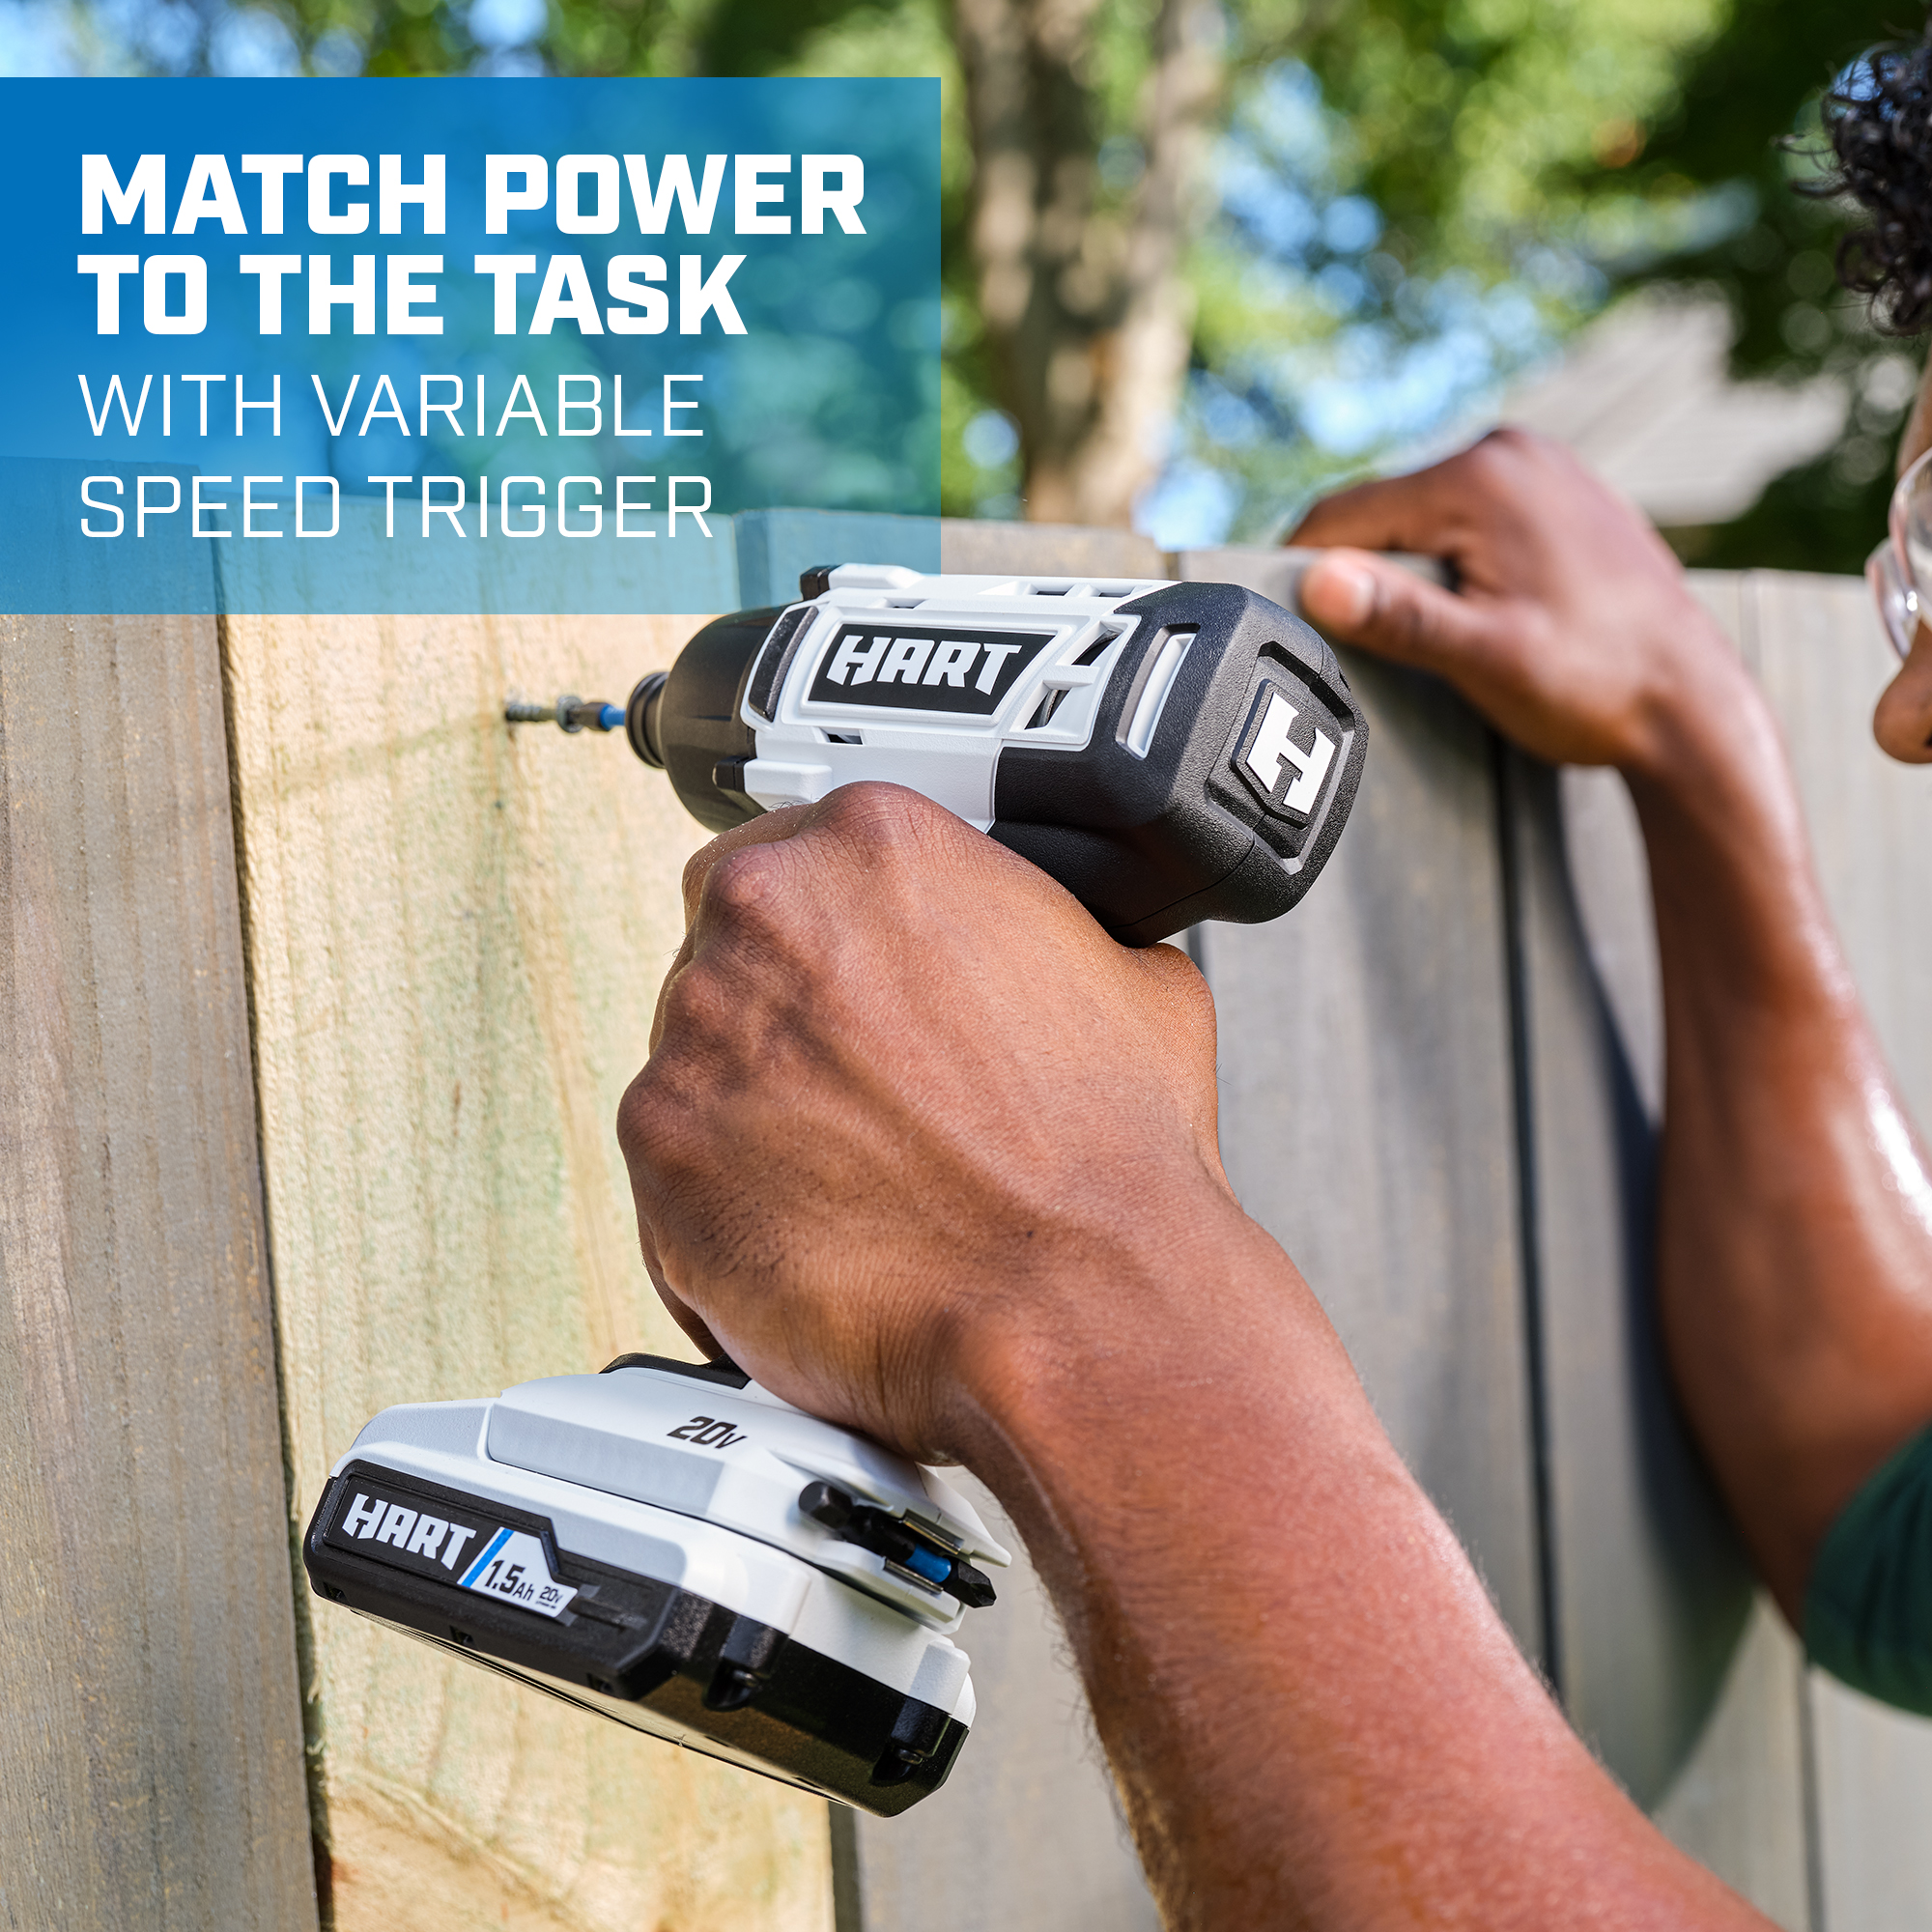 Match power to the task with variable speed trigger